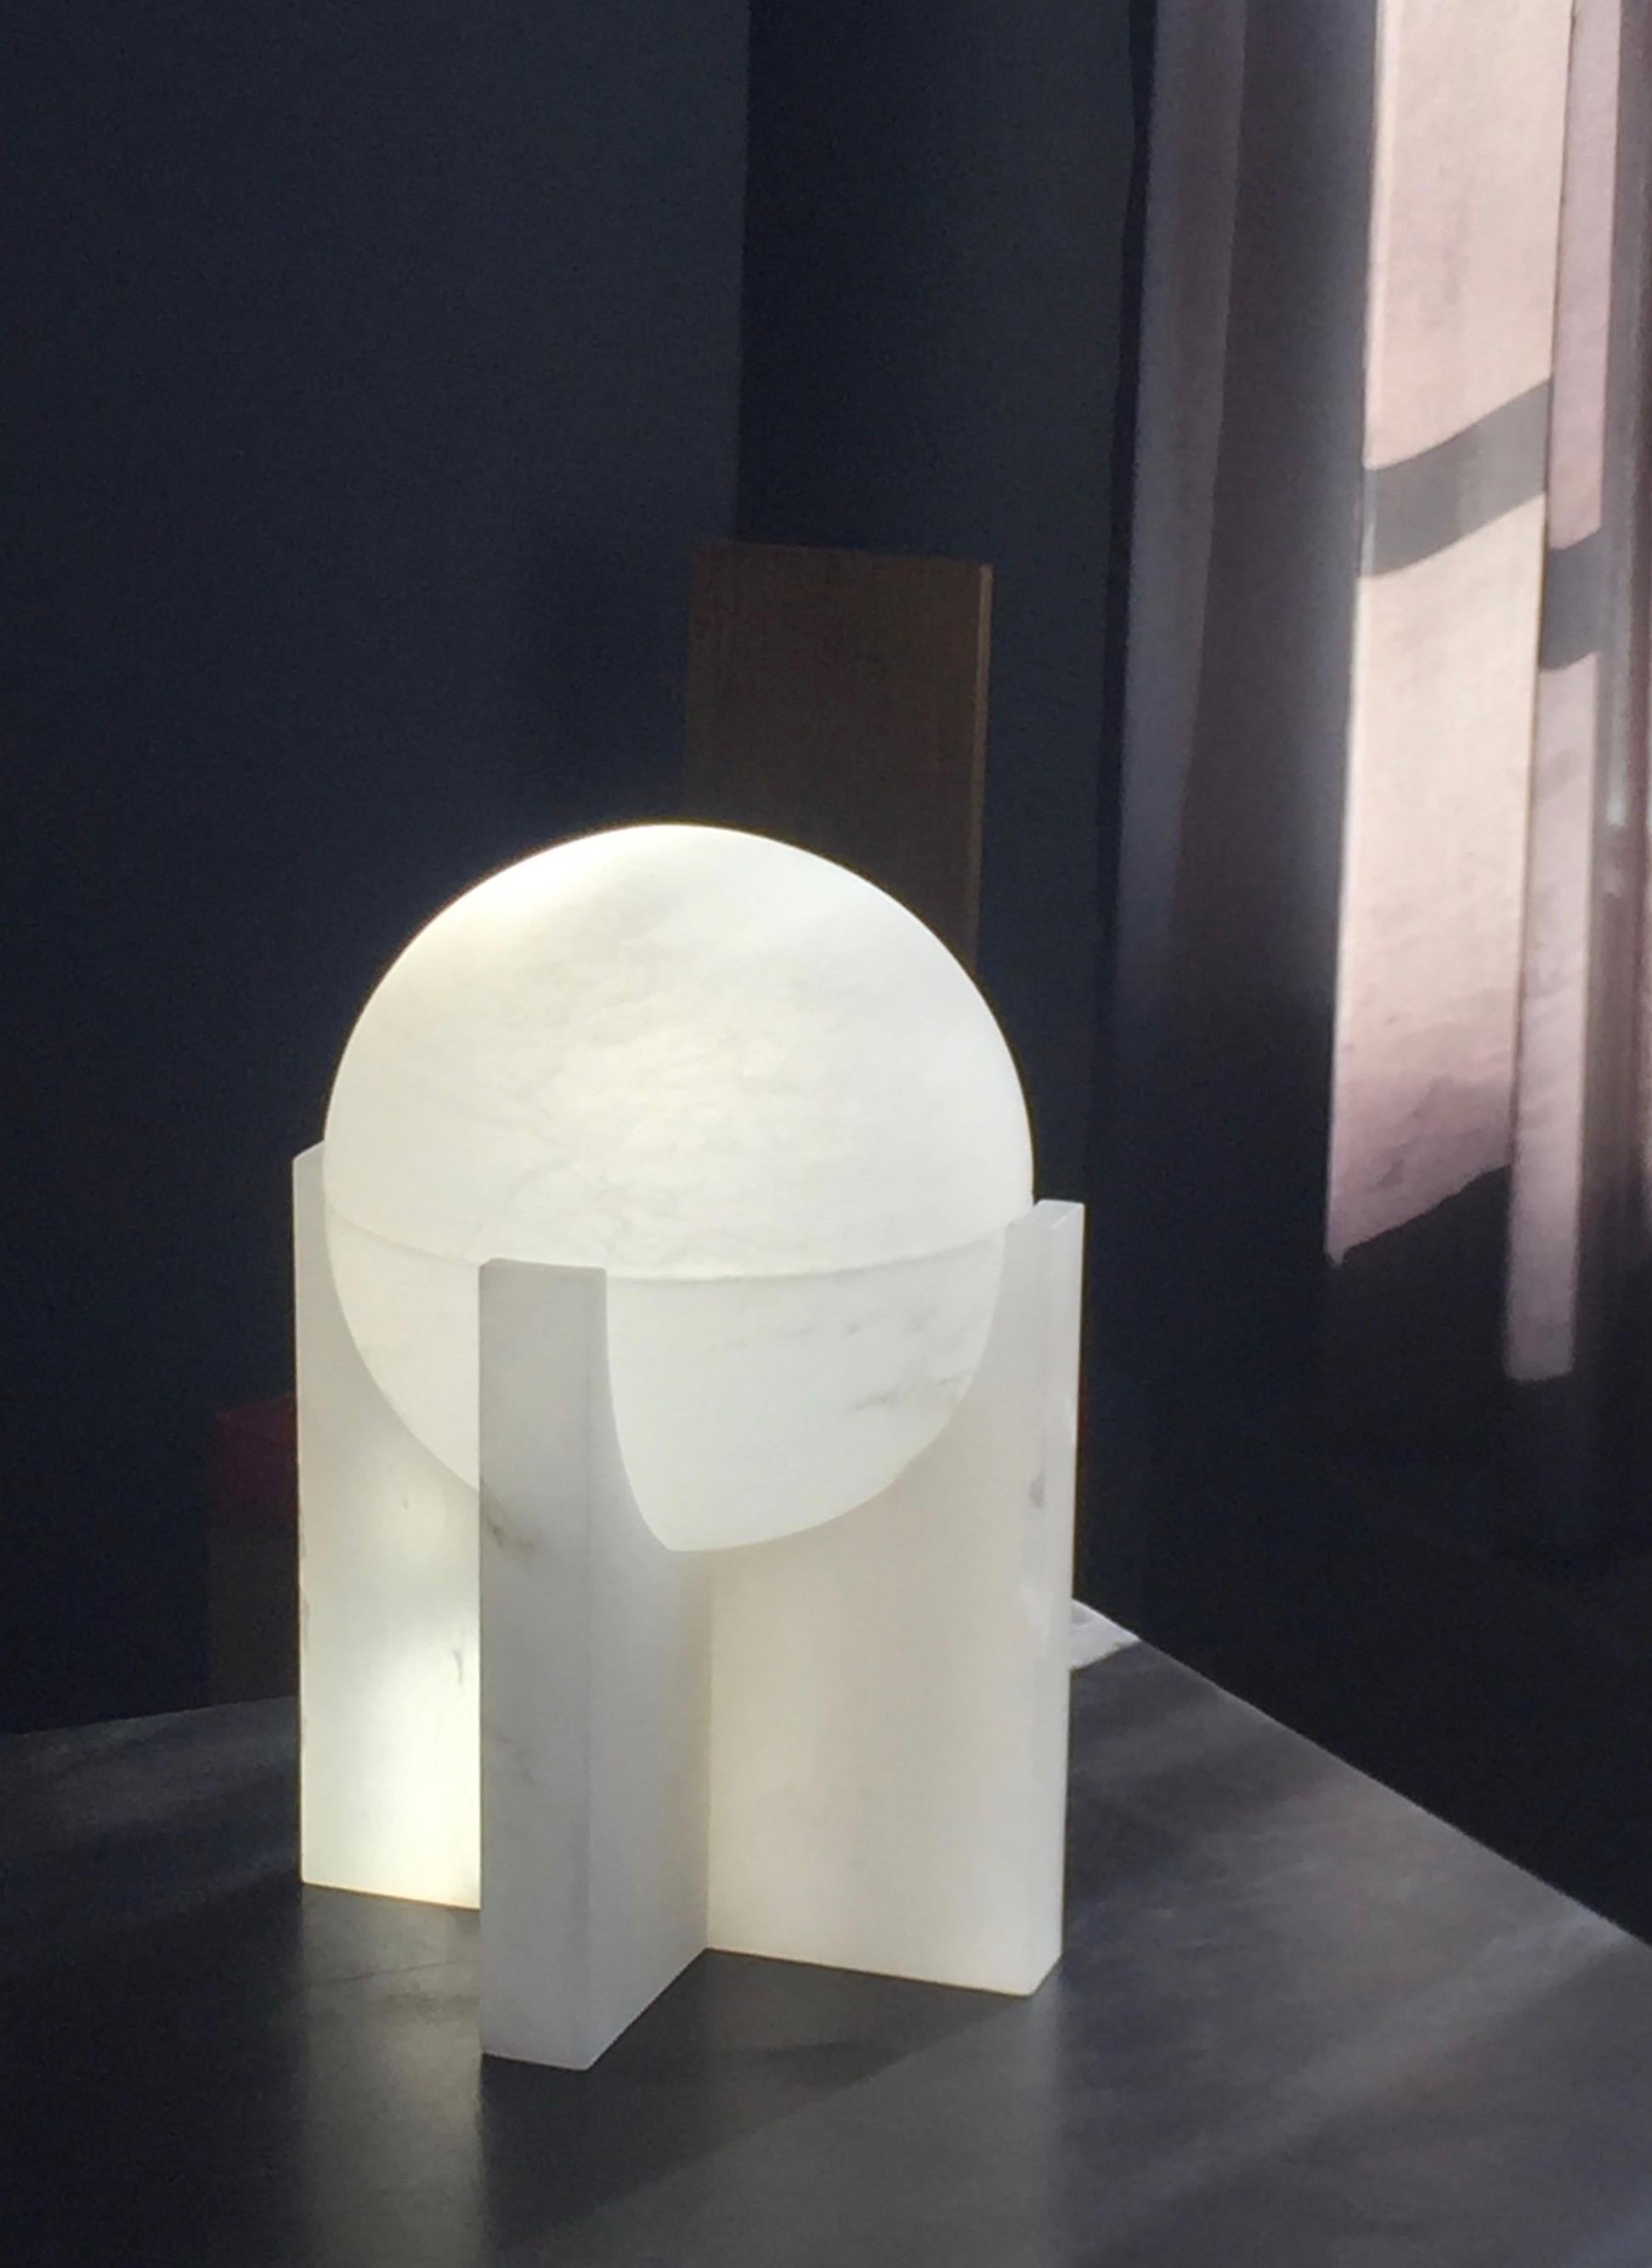 'Sphere' Alabaster table lamp in the manner of Pierre Chareau. Handcrafted in Los Angeles in the workshop of noted French designer and antiques dealer Denis de le Mesiere, who meticulously pays homage to the work of Pierre Chareau with scrupulous